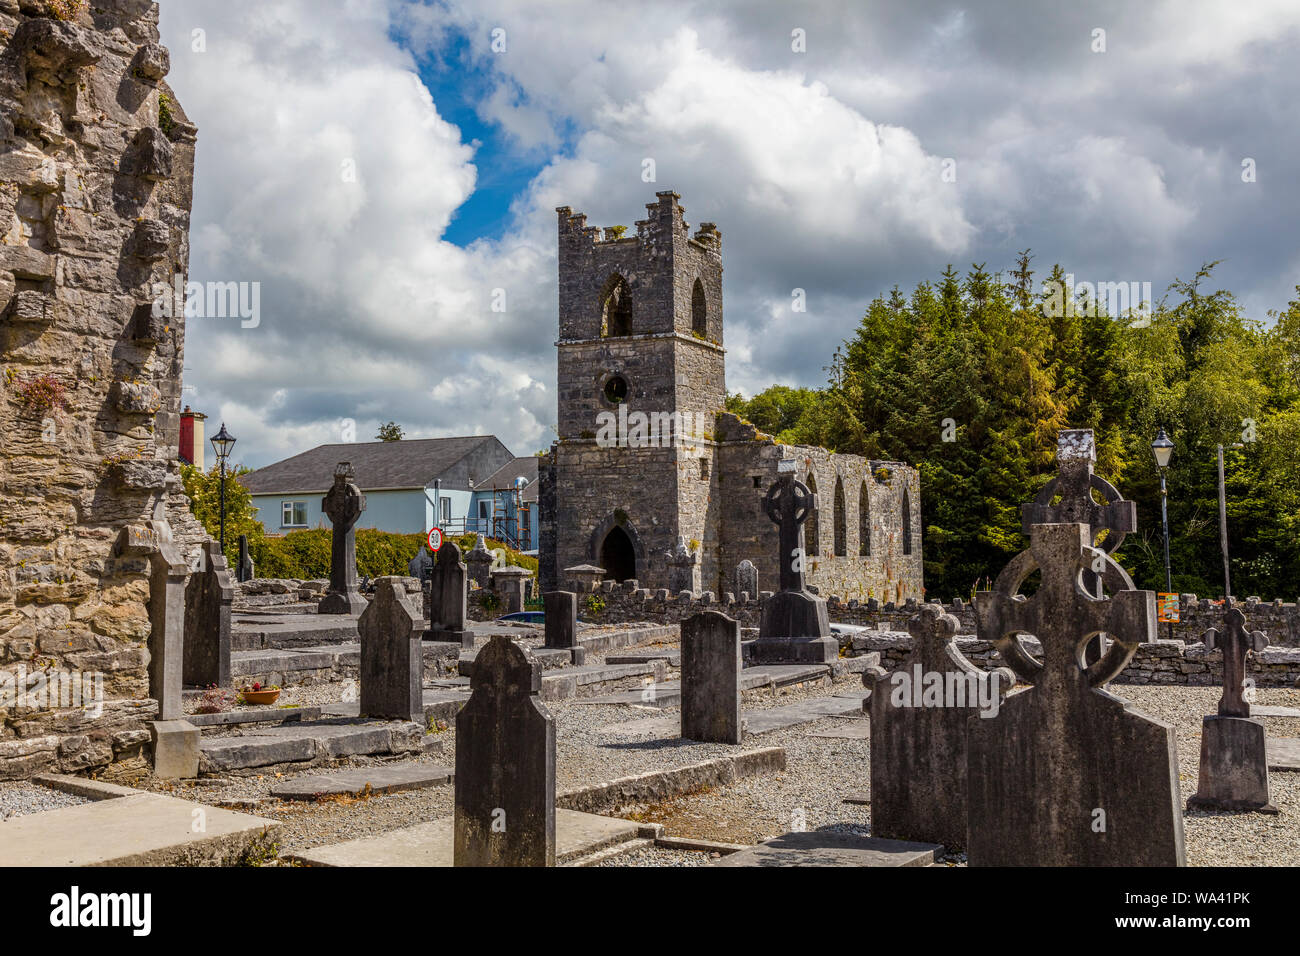 Ruins of the Cong Abbey also known as the Royal Abbey of Cong, in County Mayo Ireland Stock Photo